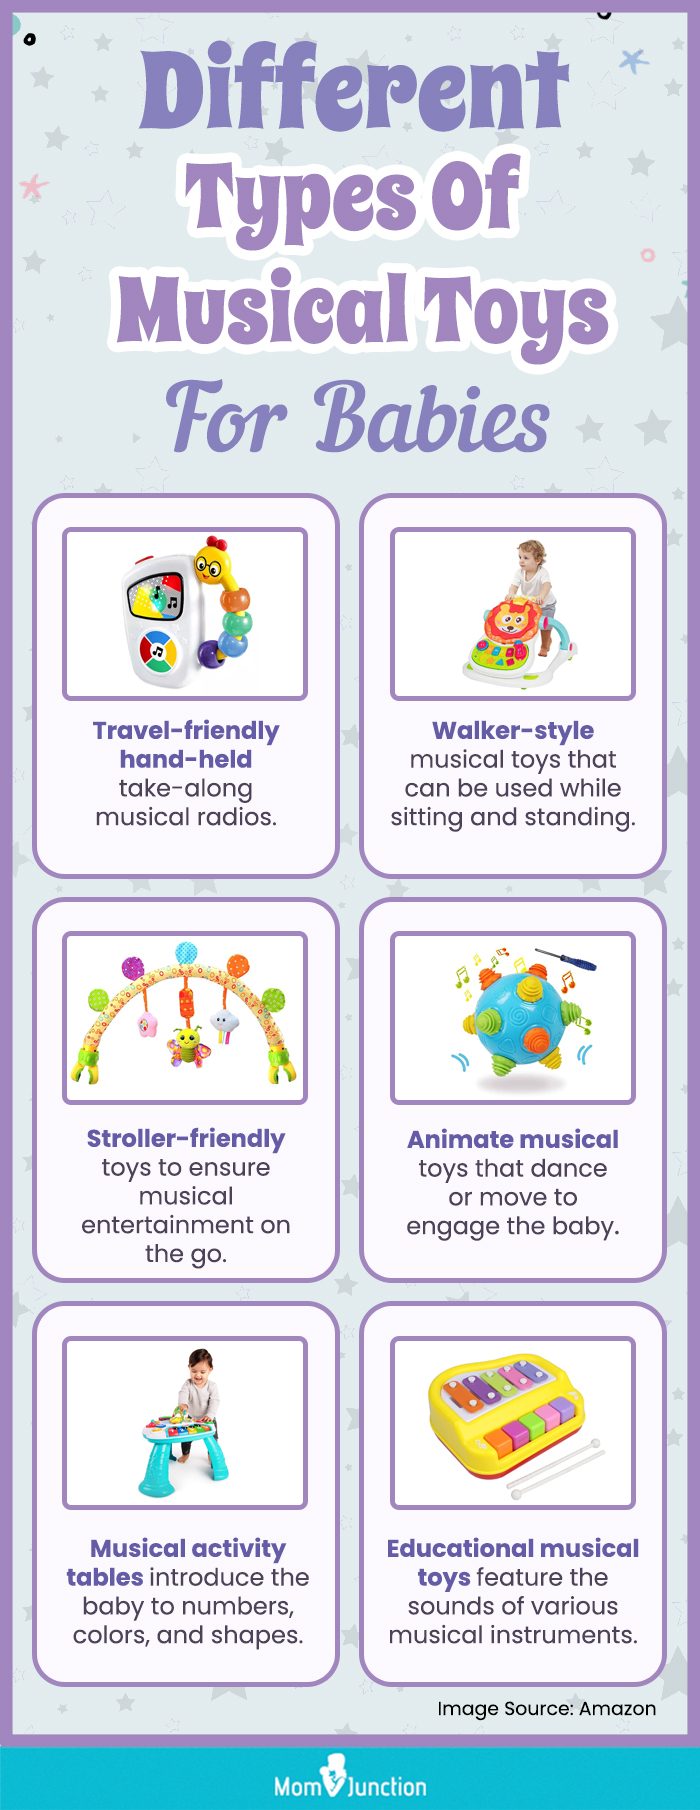 Different Types Of Musical Toys For Babies(infographic)